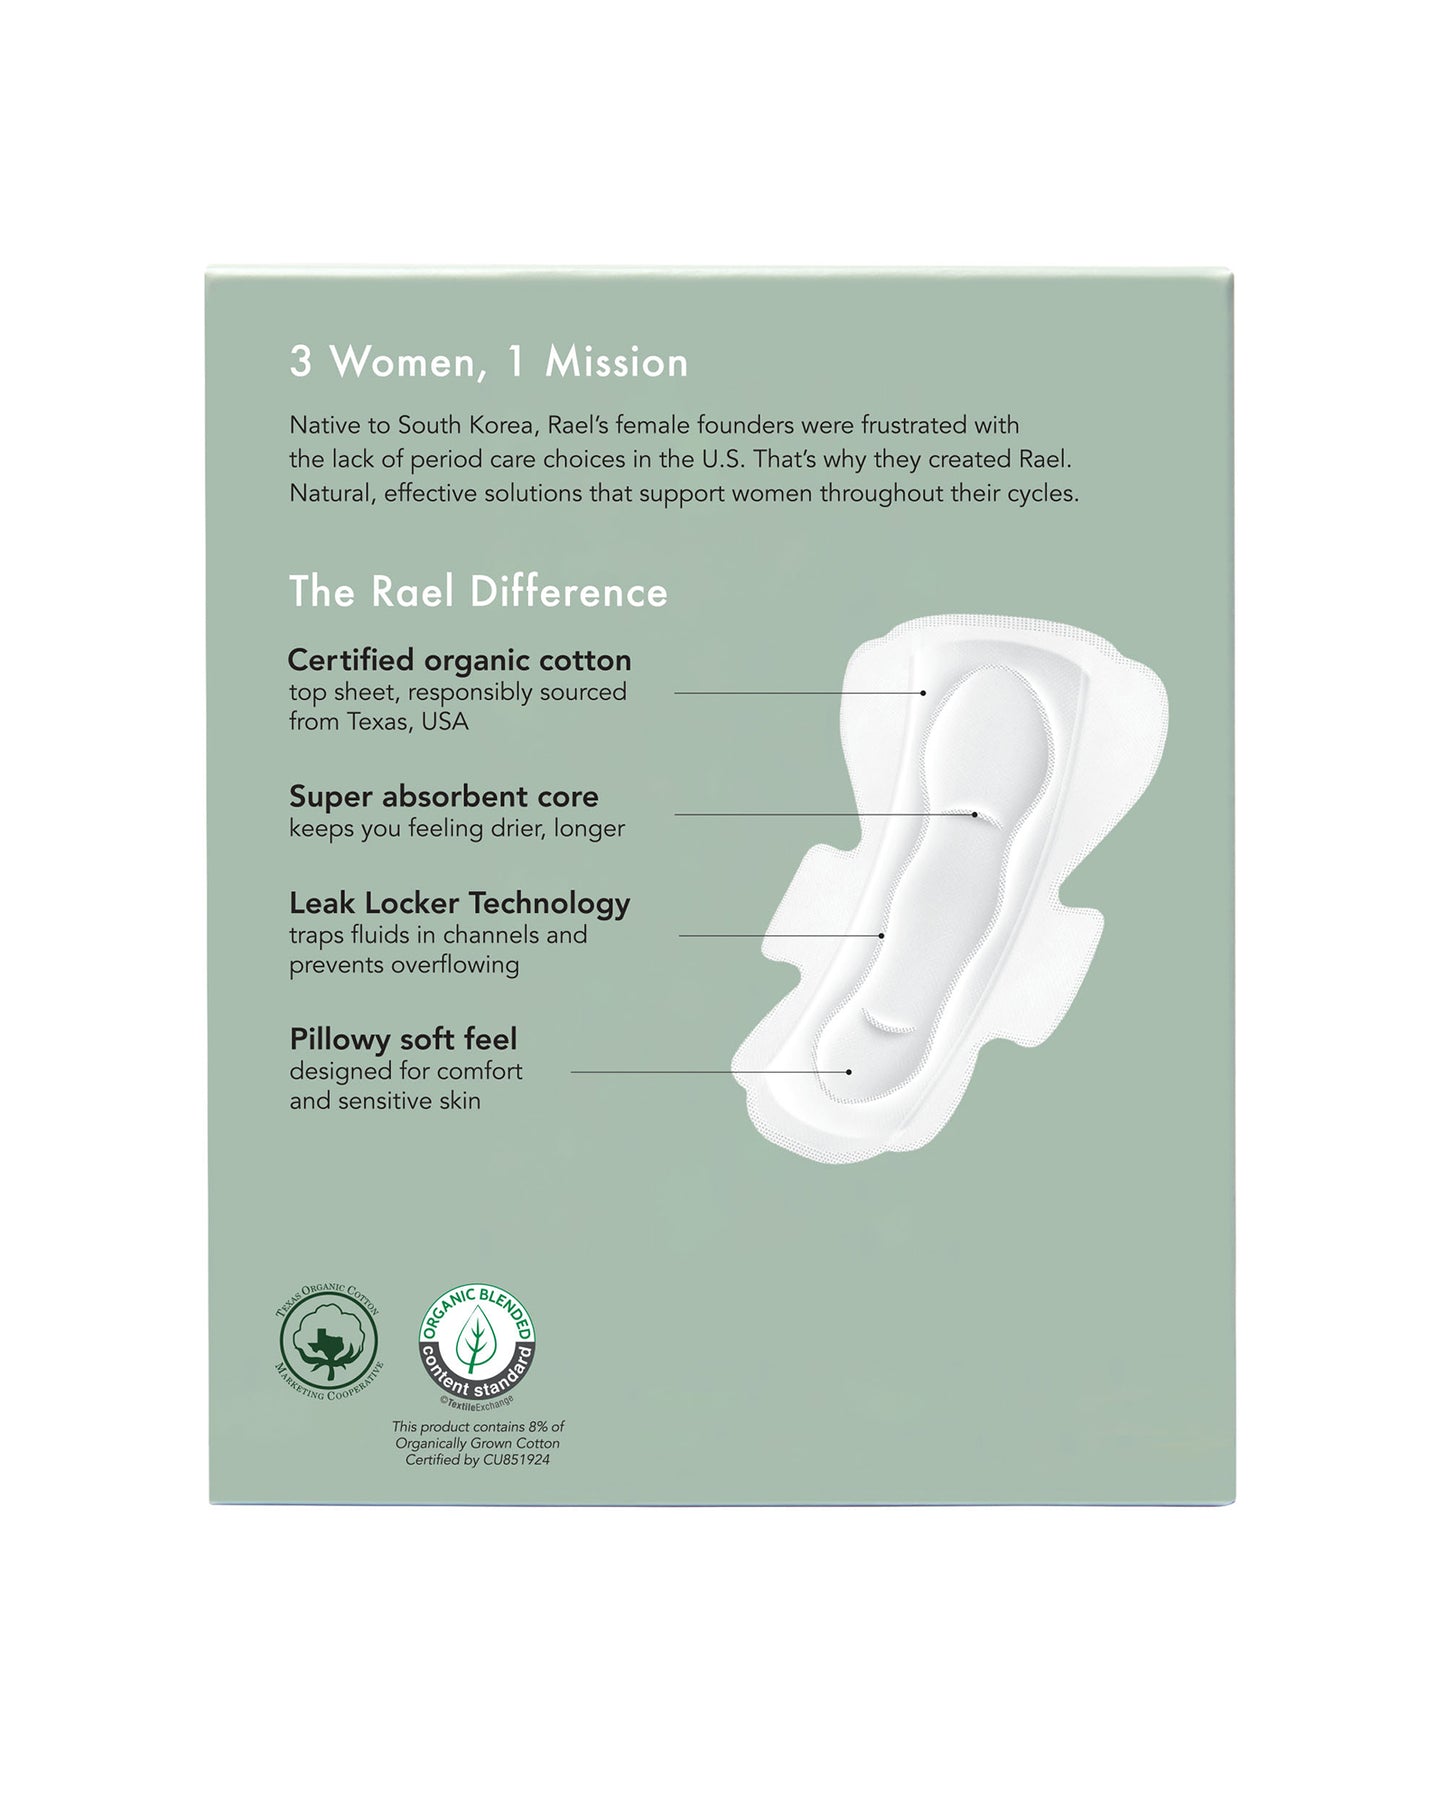 These Rif Organic Cotton Pads from Tailorie are Eco-friendly and